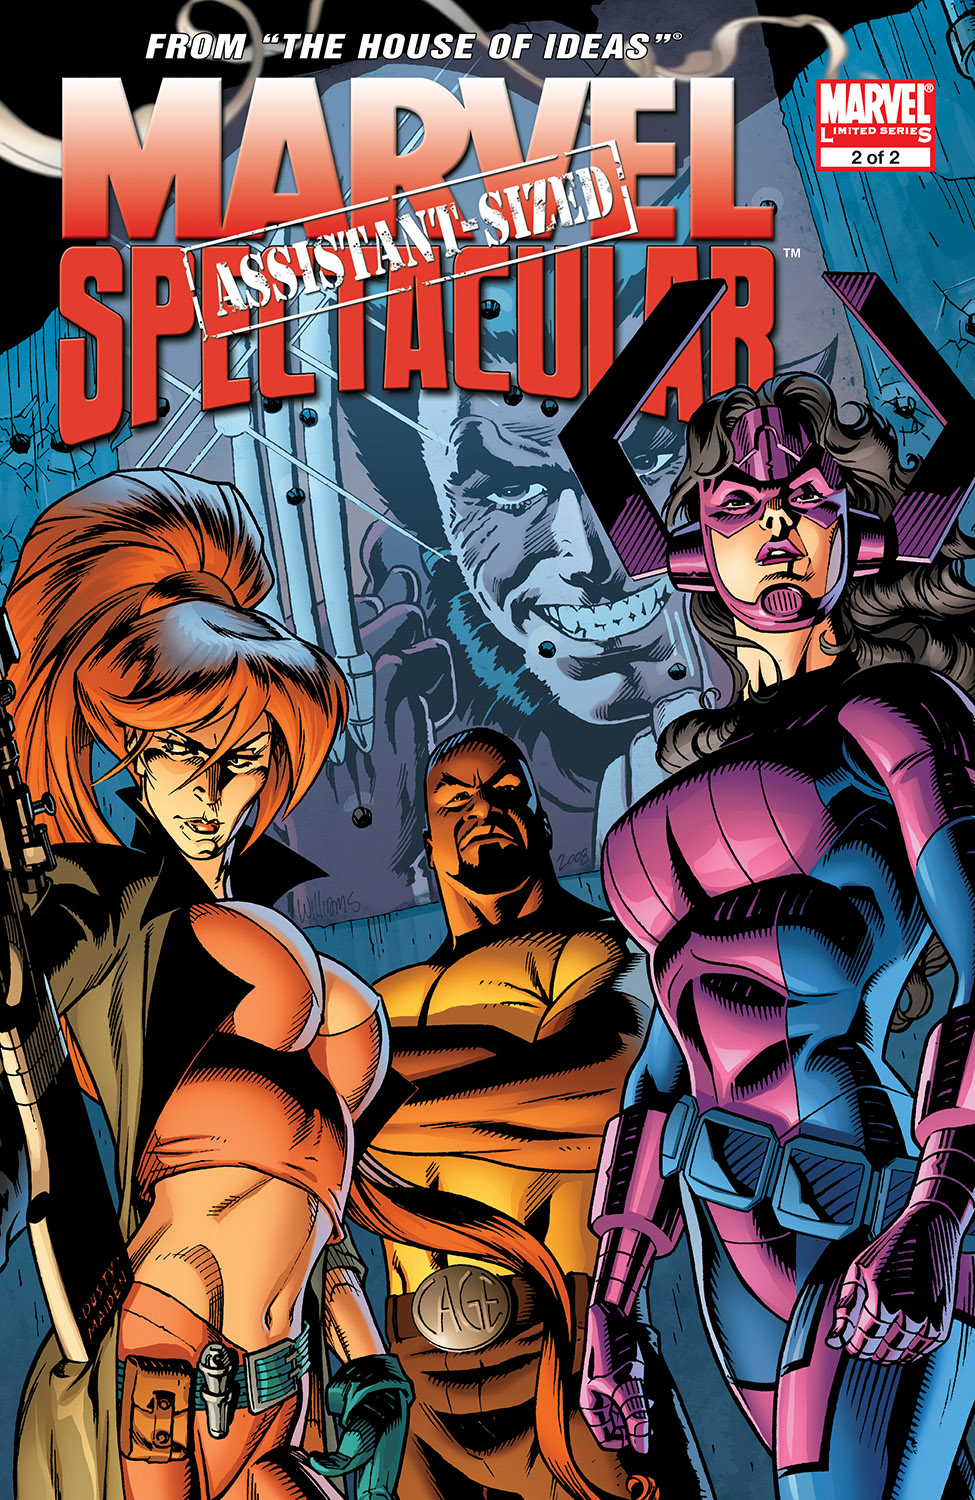 Marvel Assistant-Sized Spectacular (2009) #2